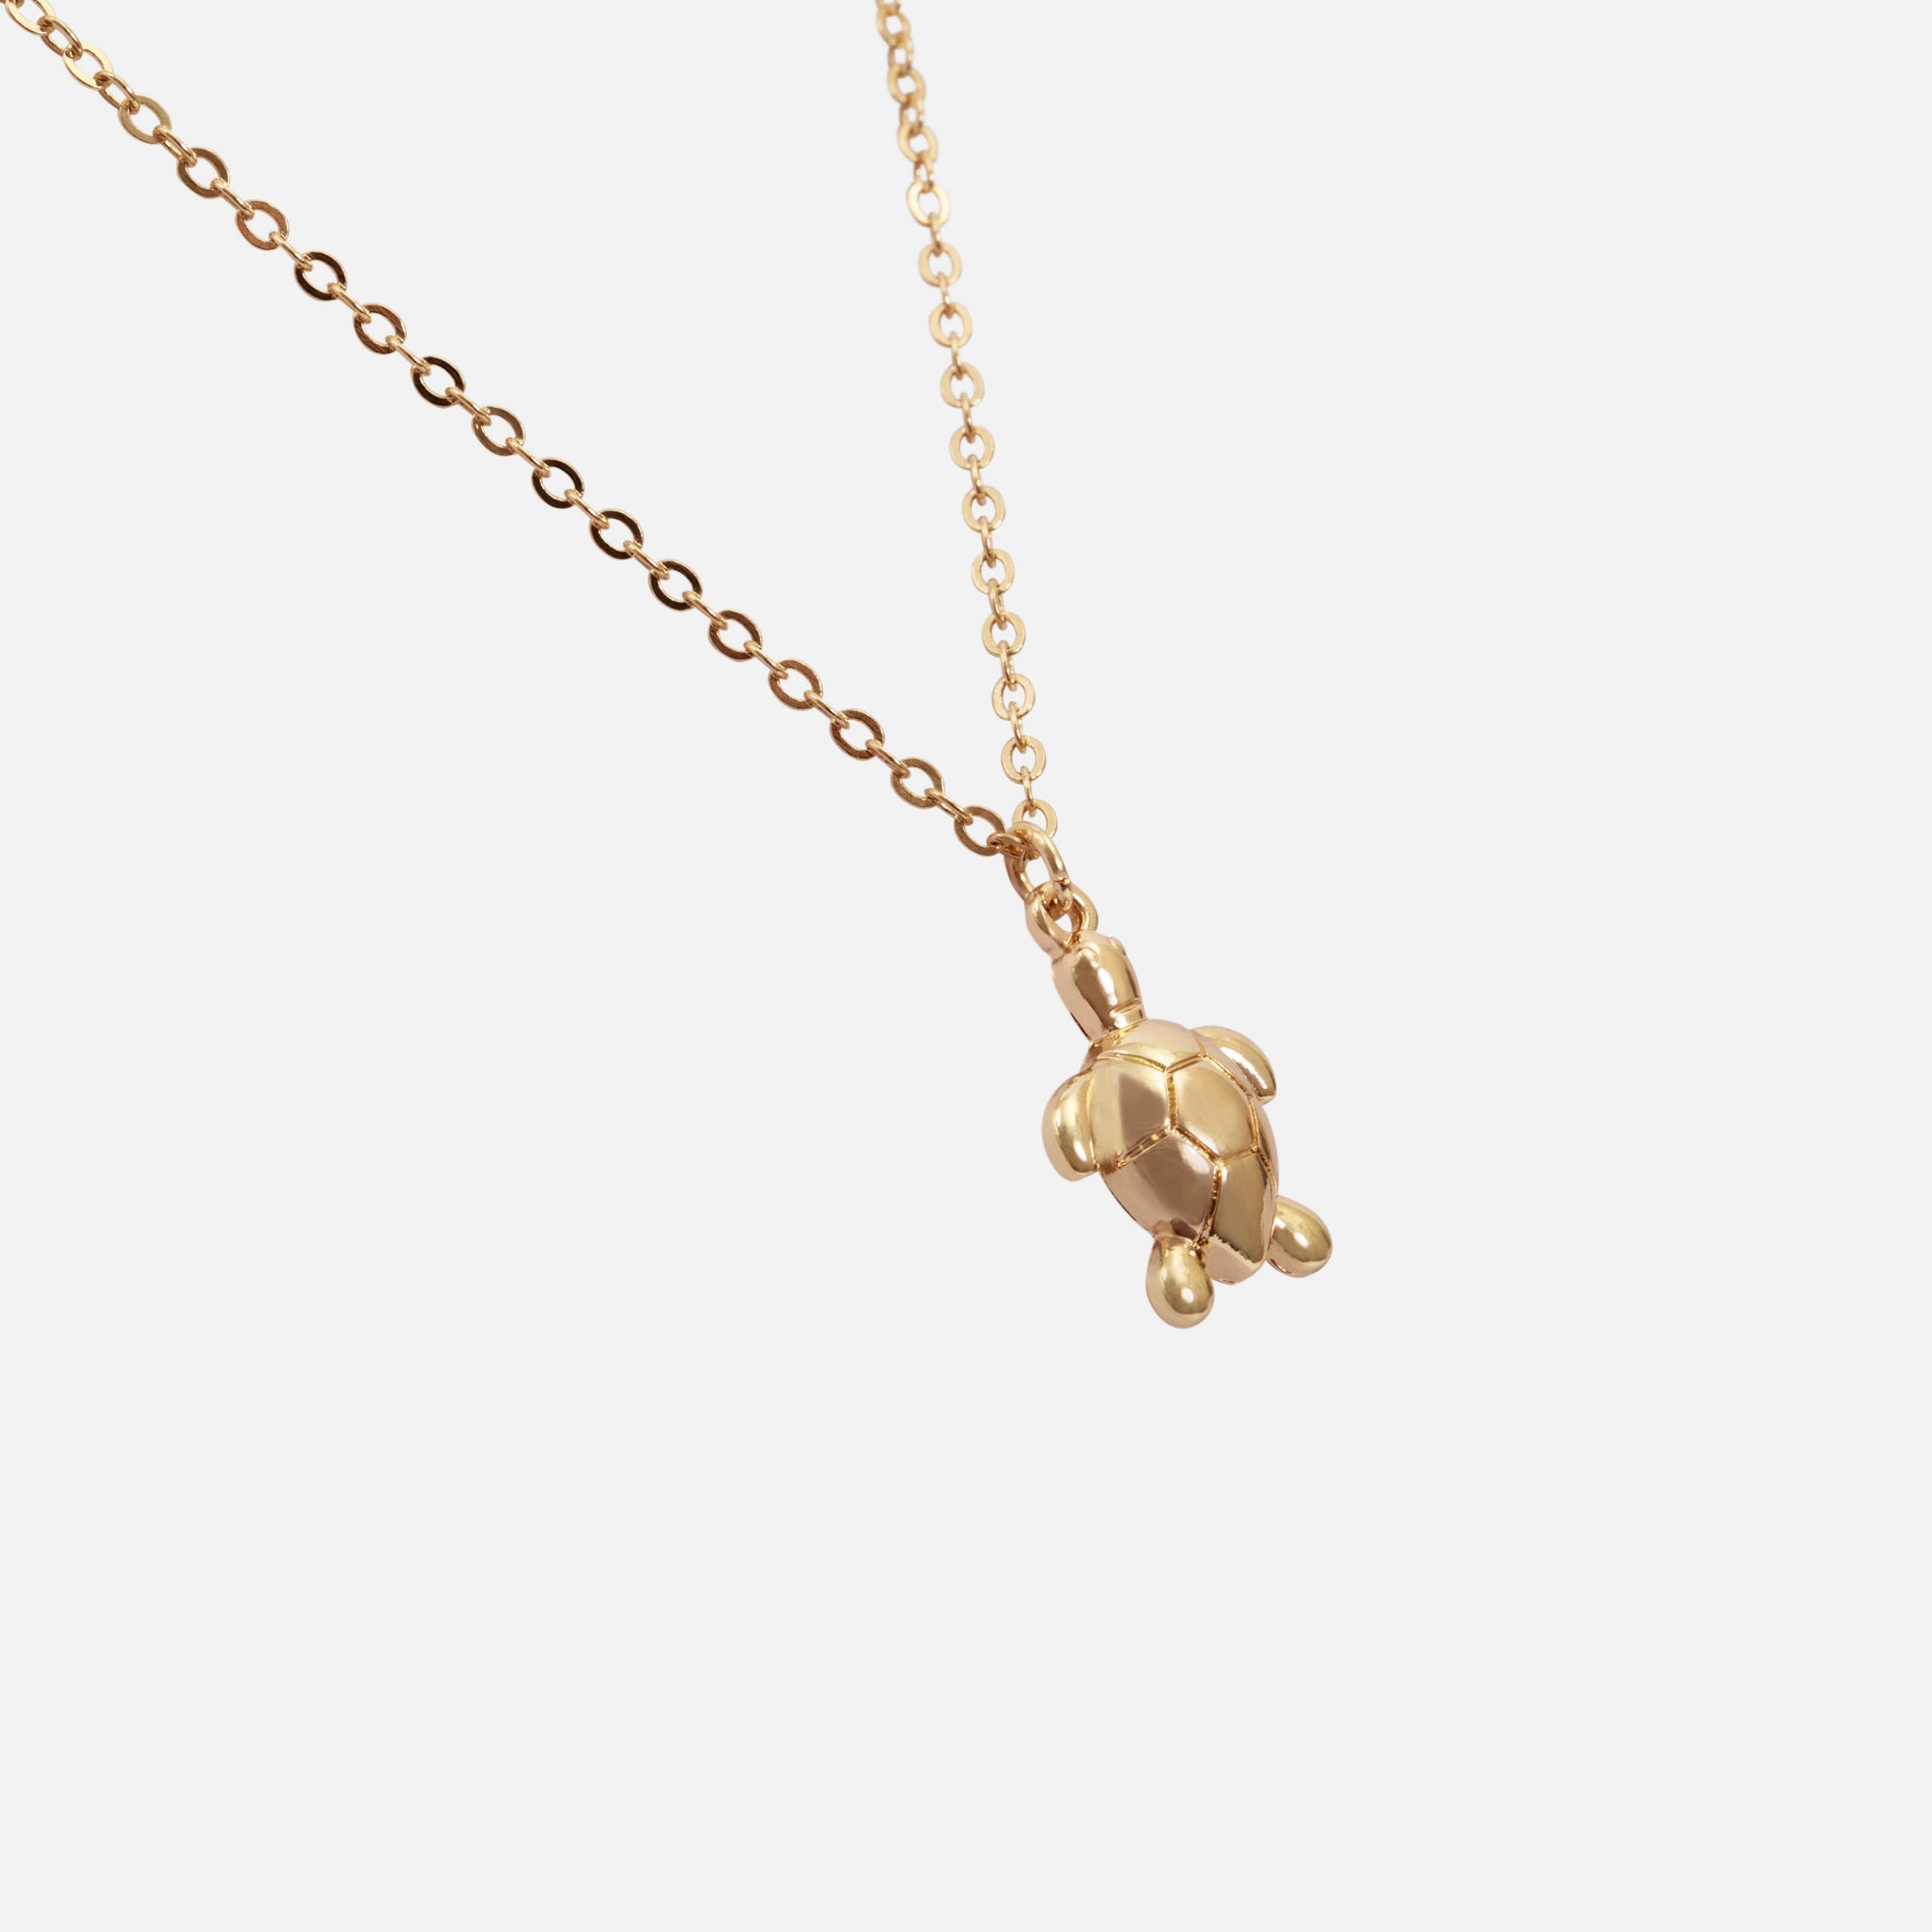 Golden necklace with turtle charm 